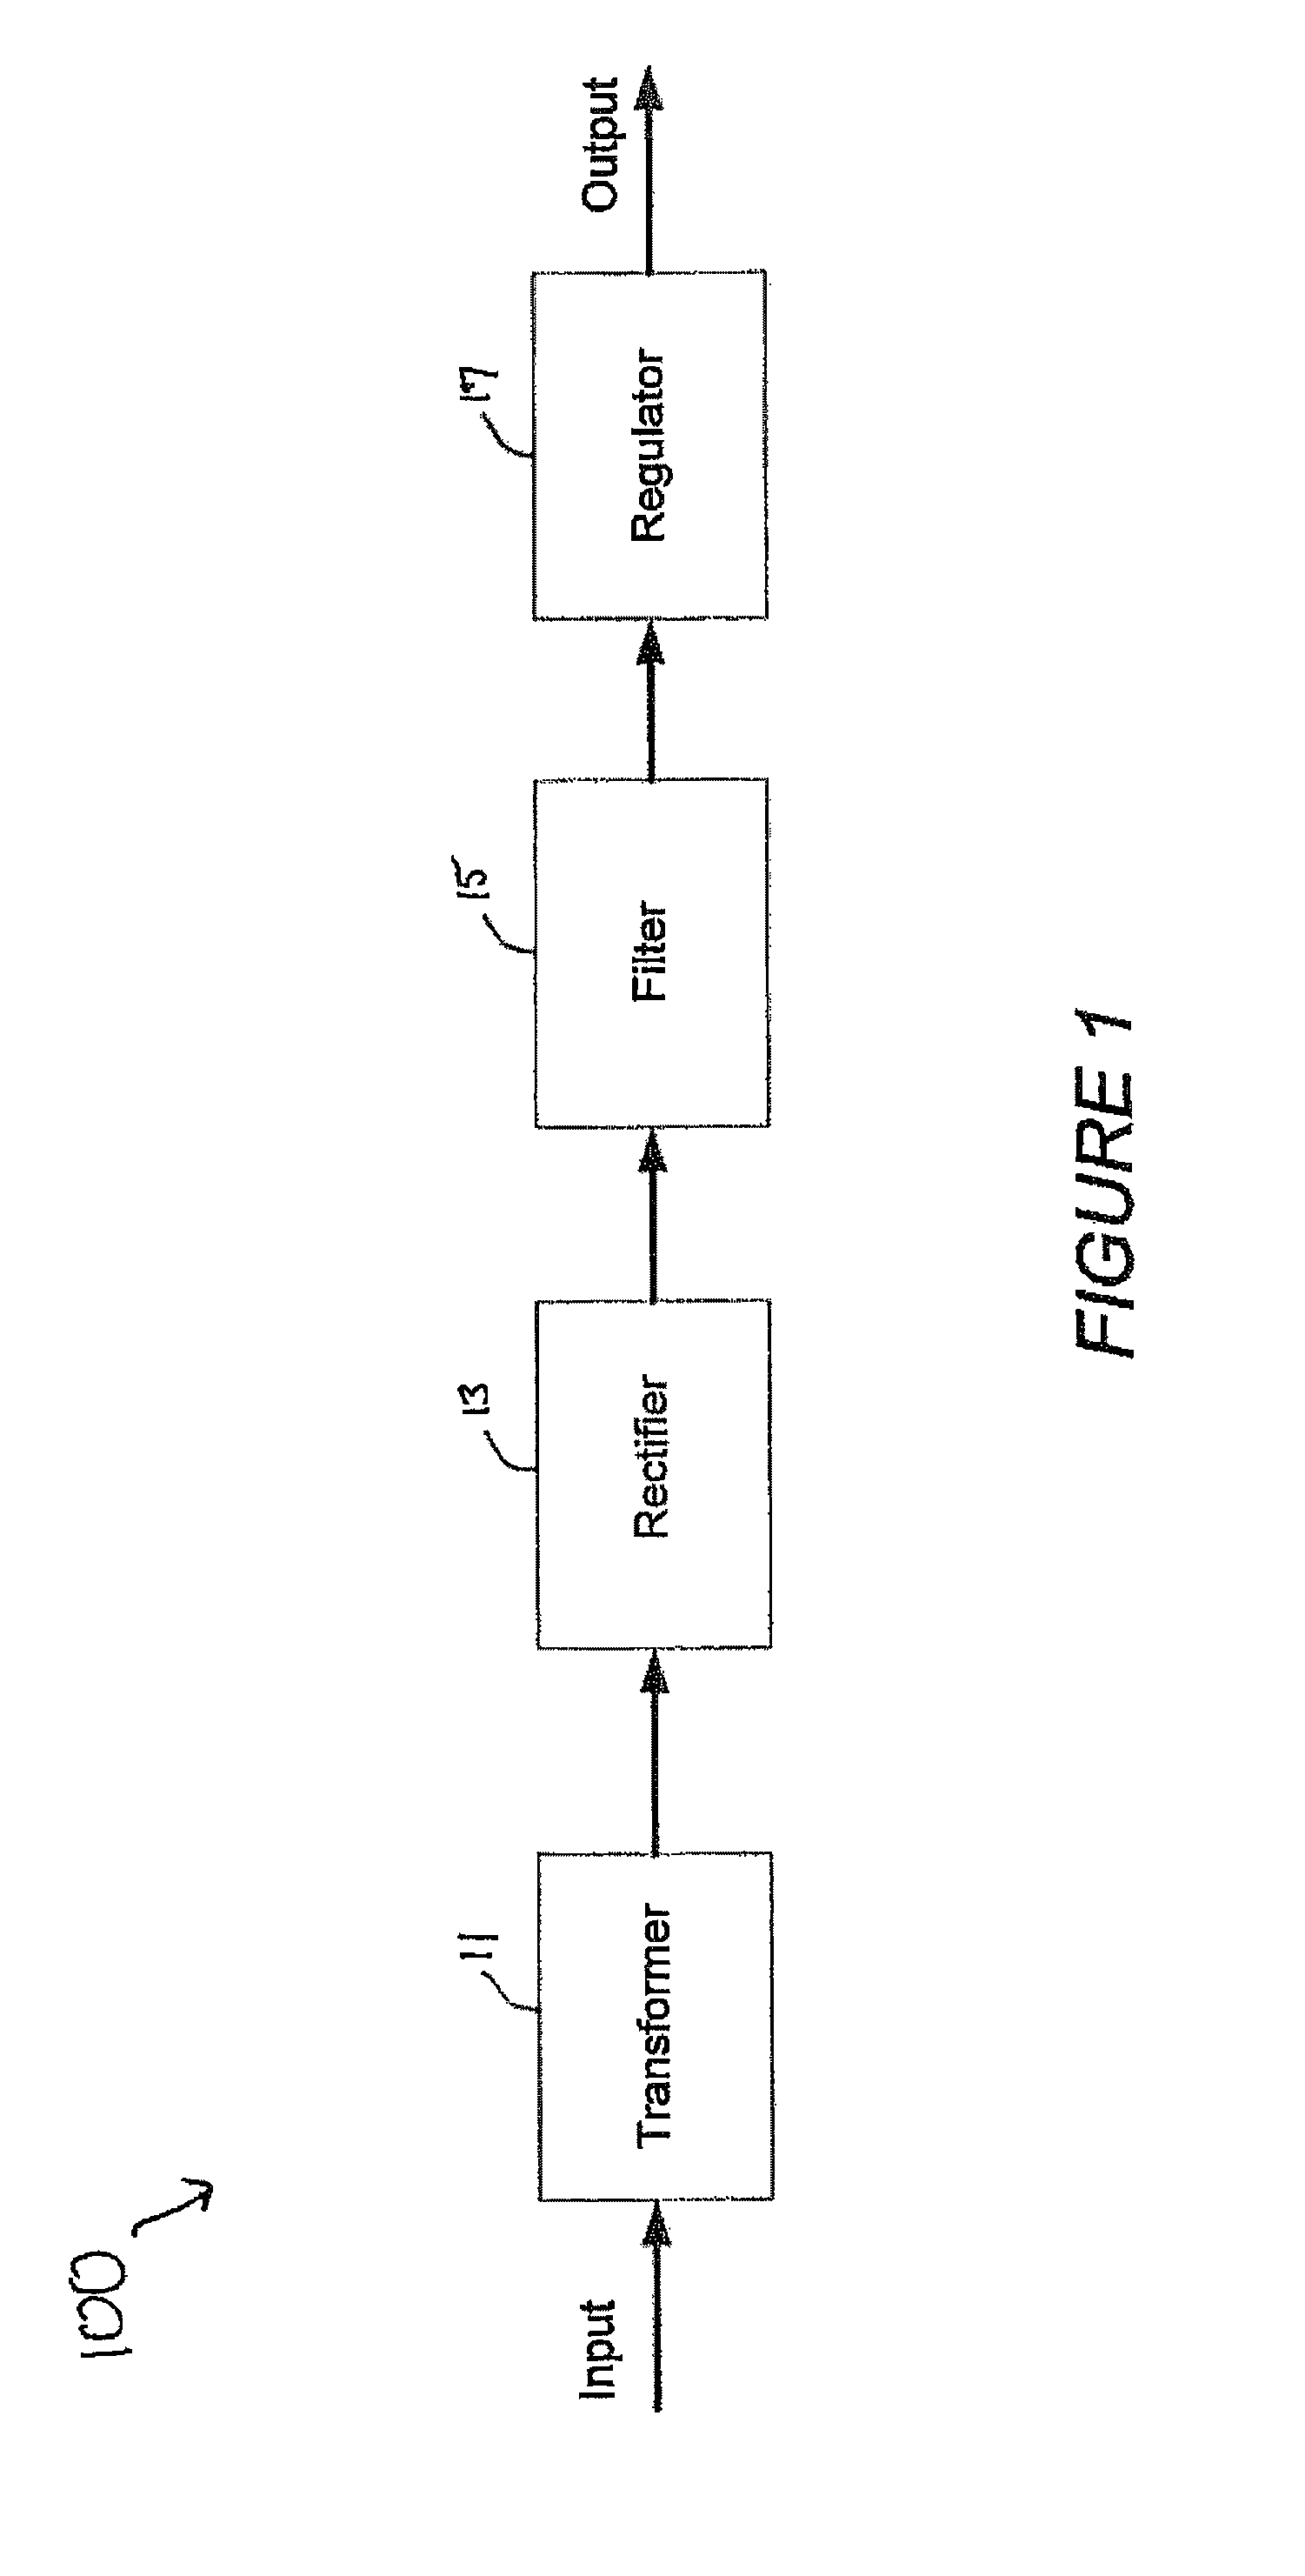 Apparatus and method for providing a modular power supply with multiple adjustable output voltages